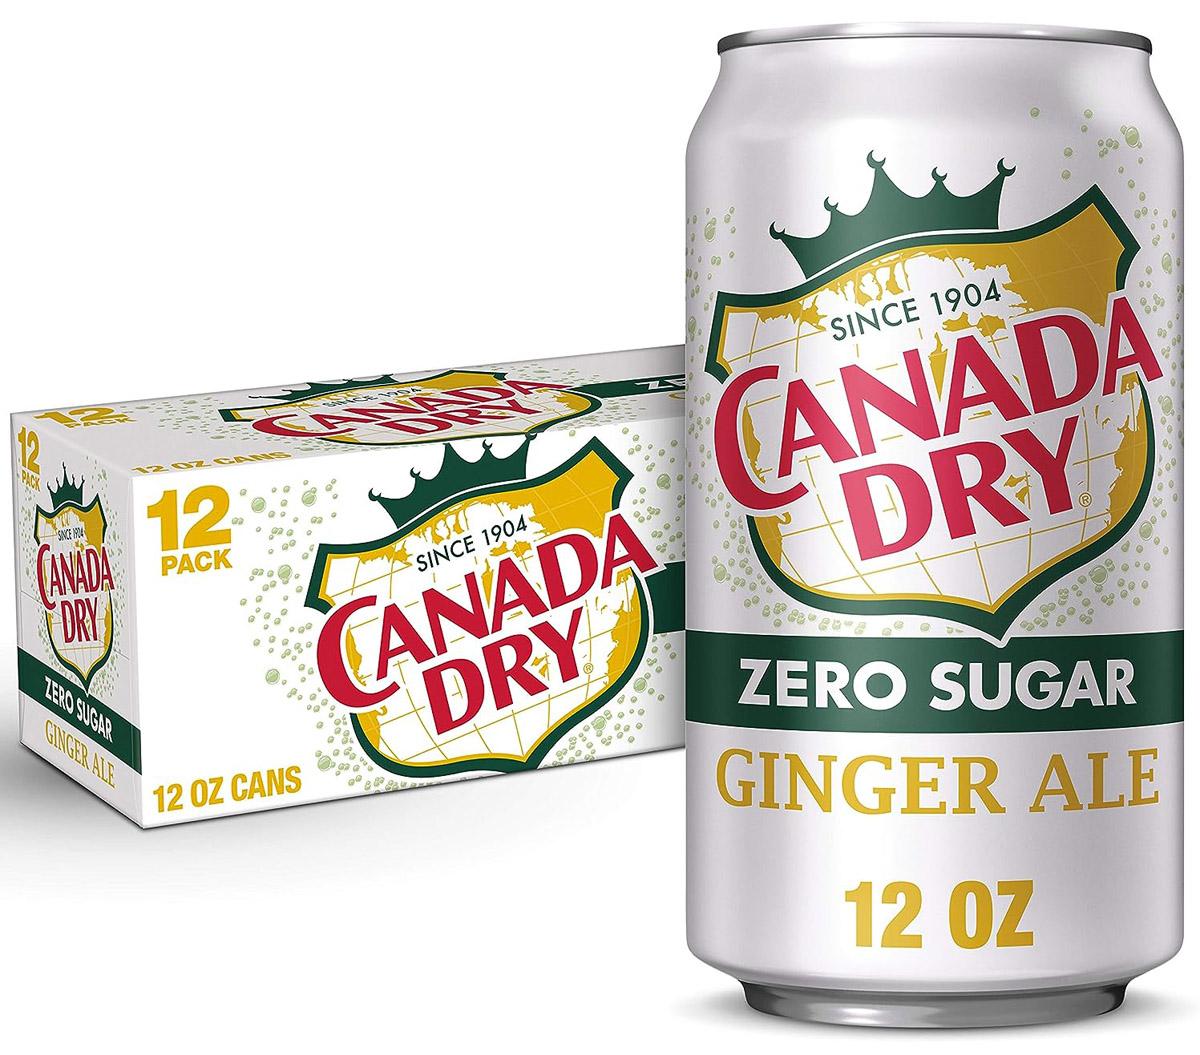 Canada Dry Zero Sugar Ginger Ale Soda 12 Pack for $3.92